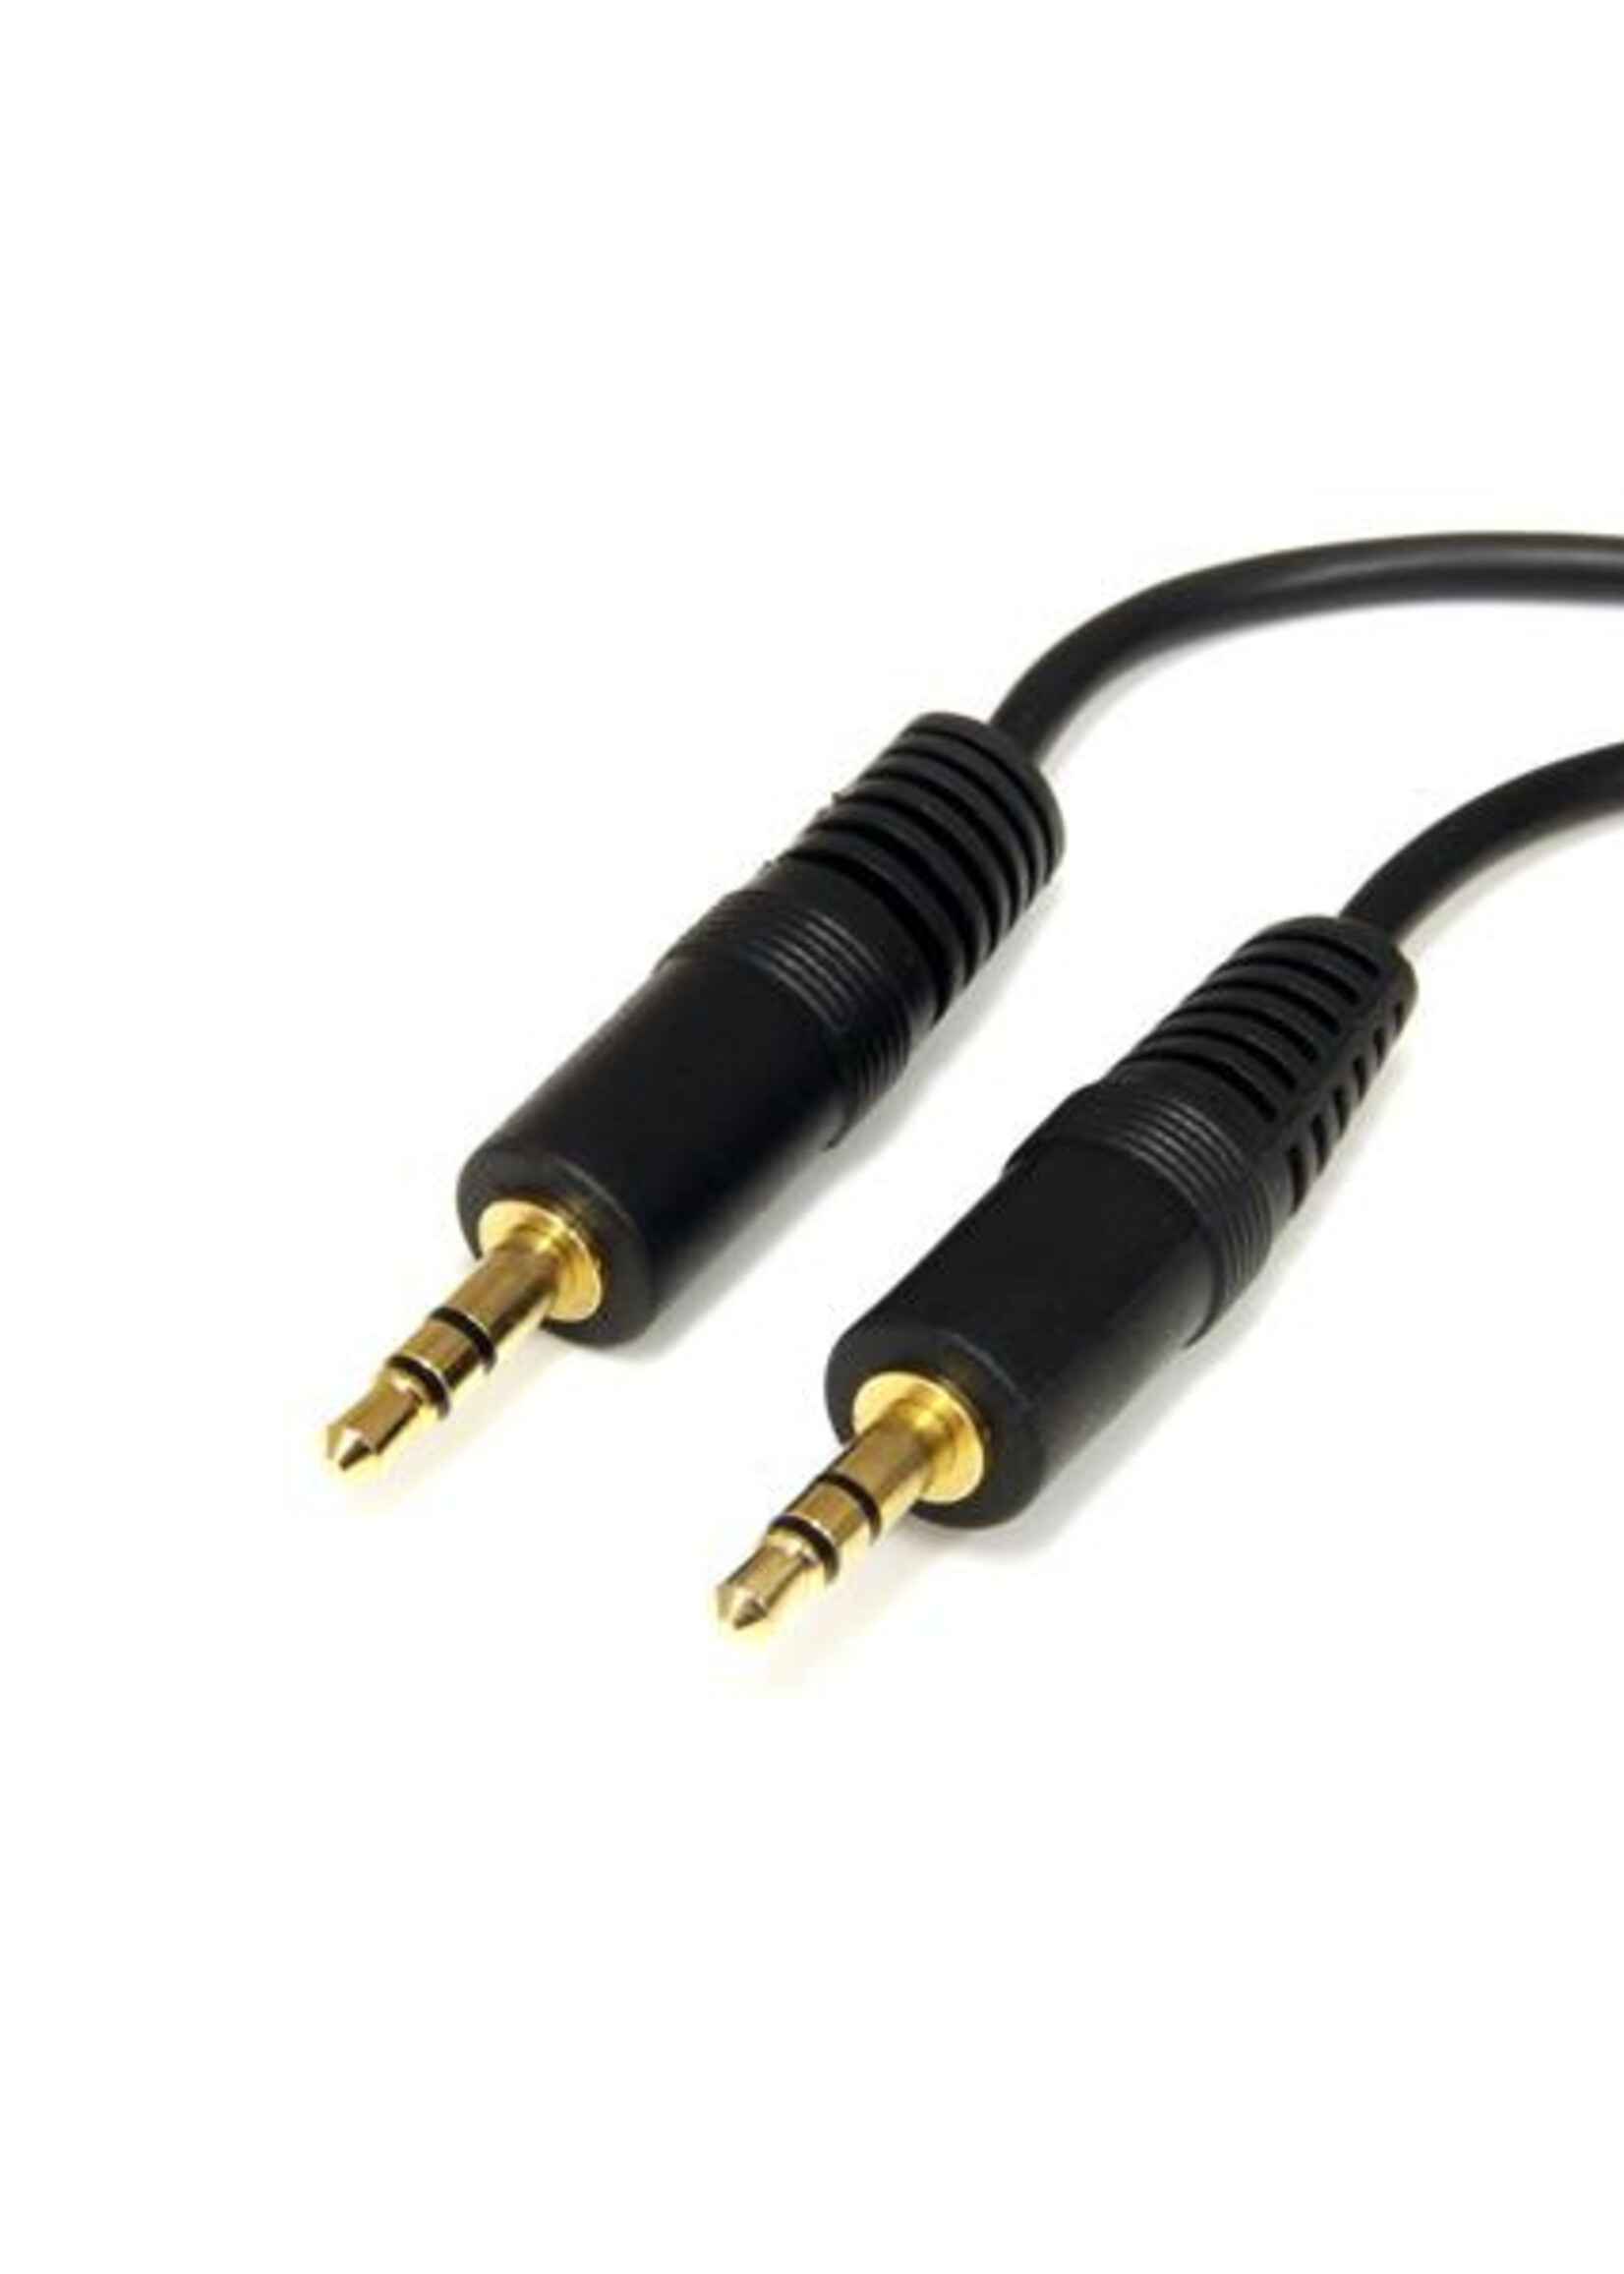 6 ft 3.5mm Stereo Audio Cable